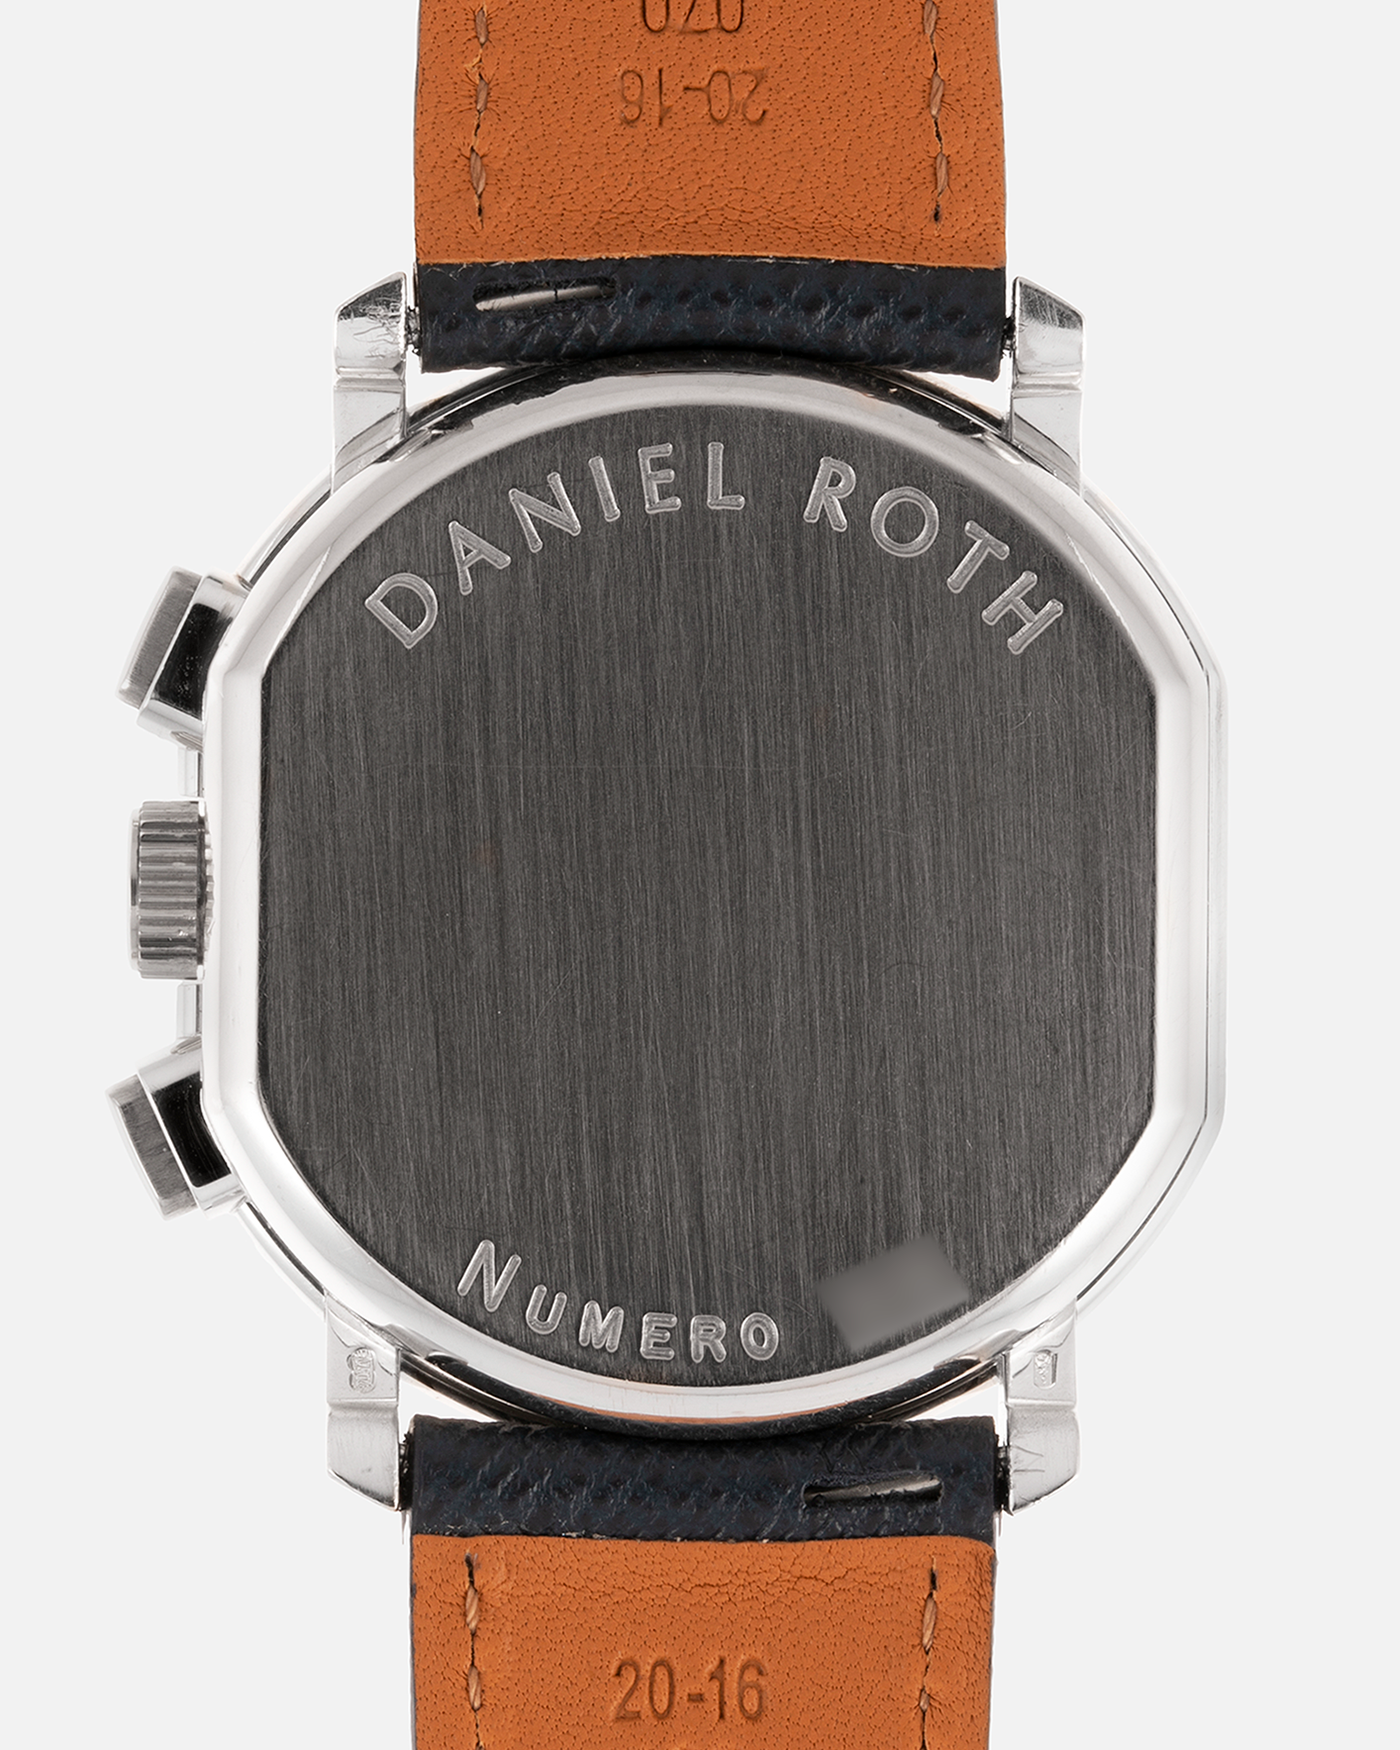 Brand: Daniel Roth Year: 1990’s Model: 2147 Material: 18k White Gold Movement: Lemania 2320 Case Diameter: 35mm X 38mm Strap: Molequin Navy Blue Textured Calf Strap and 18k White Gold Daniel Roth Tang Buckle